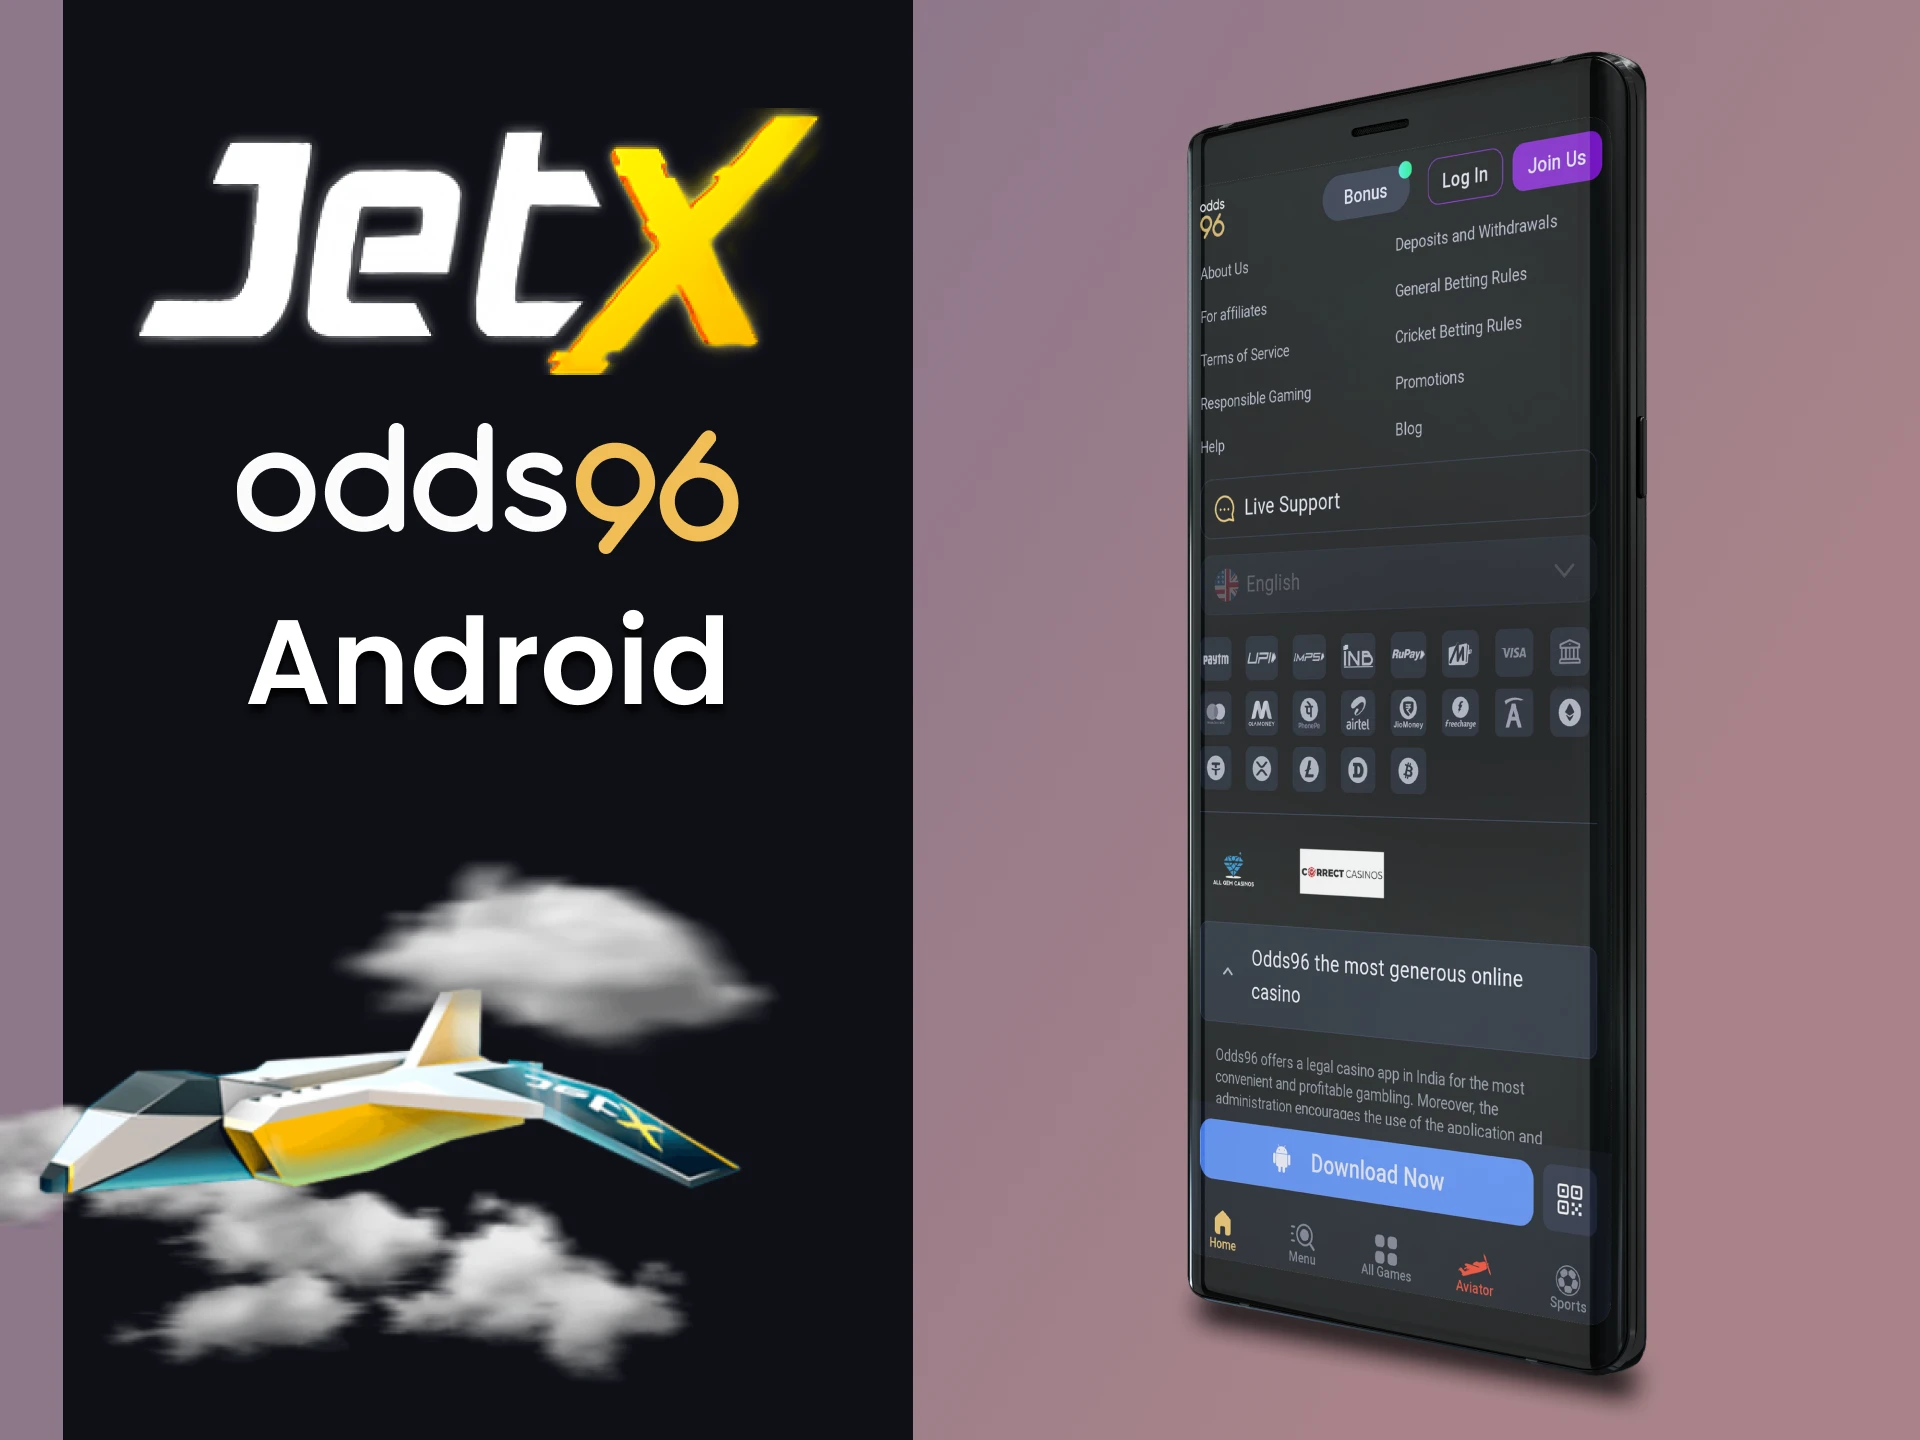 Install the Odds96 app on Android to play JetX.